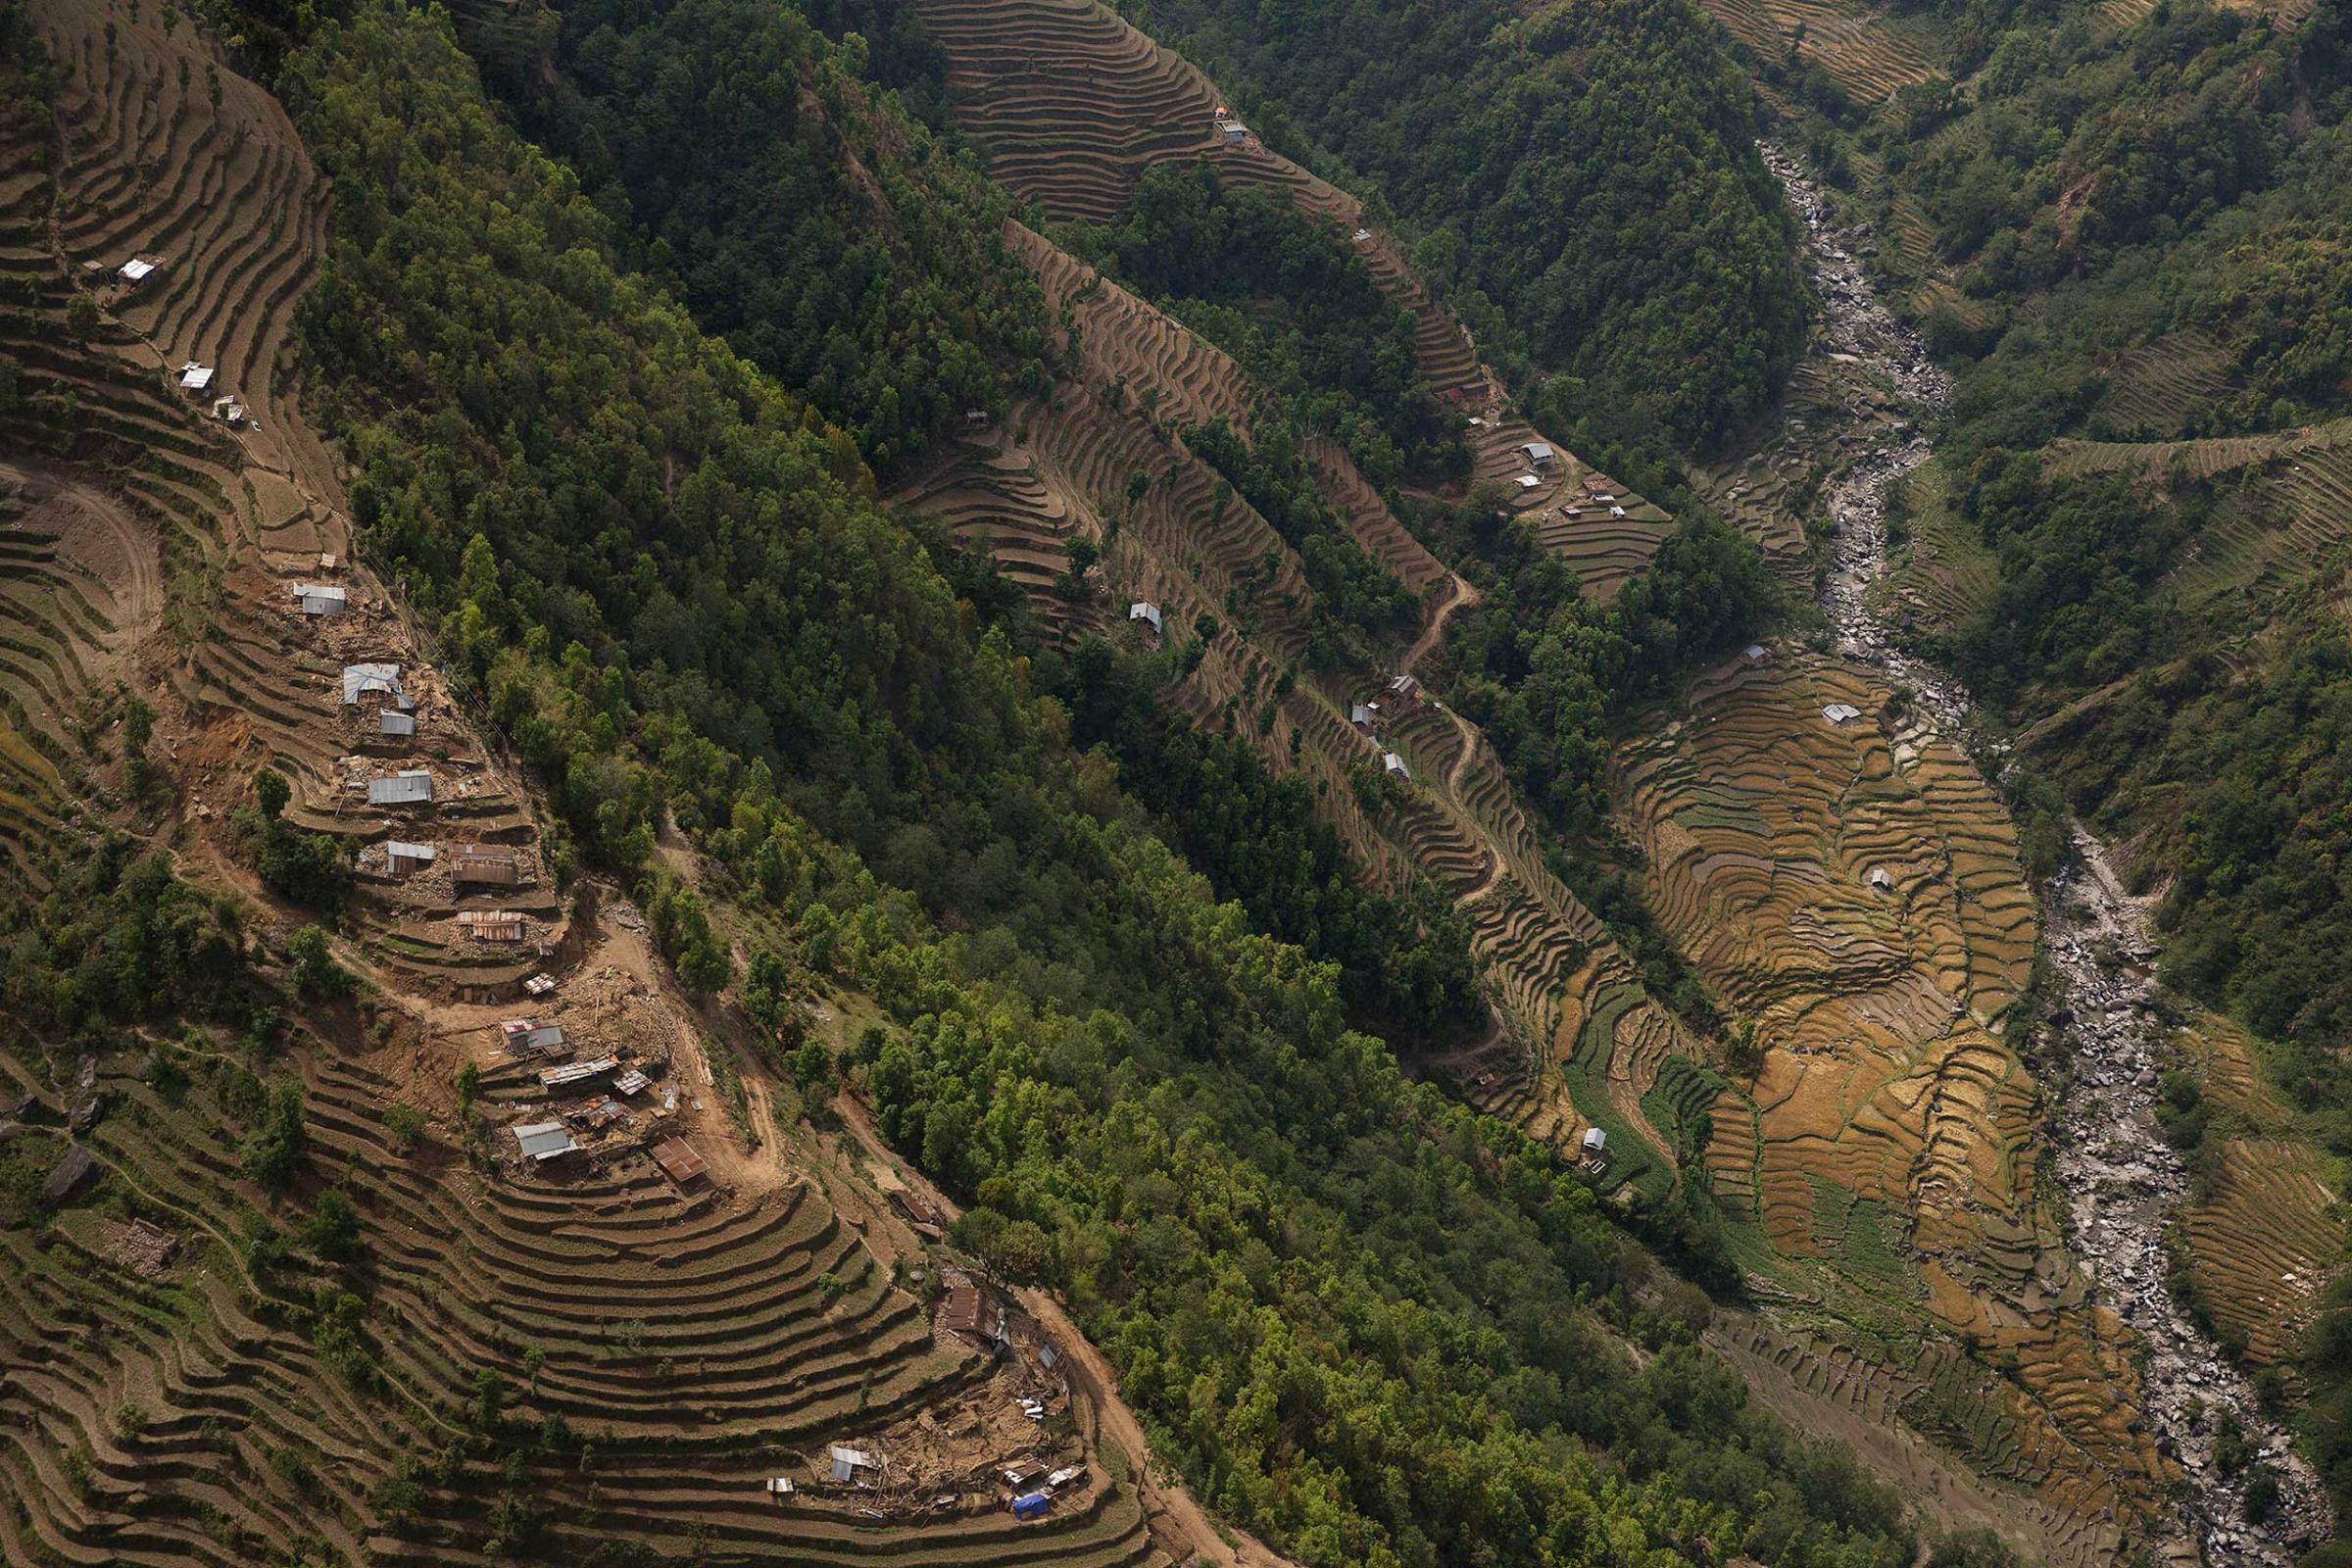 Nepal earthquake. Town of Sankhu. Mush of town was destroyed. People digging out their possessions. Aerial images of Nuwakot district, hit by the earthquake and not able to be reached by aid and rescue teams. Farming villages built atop steep hillsides with cascading, terraced fields.by James Nachtwey